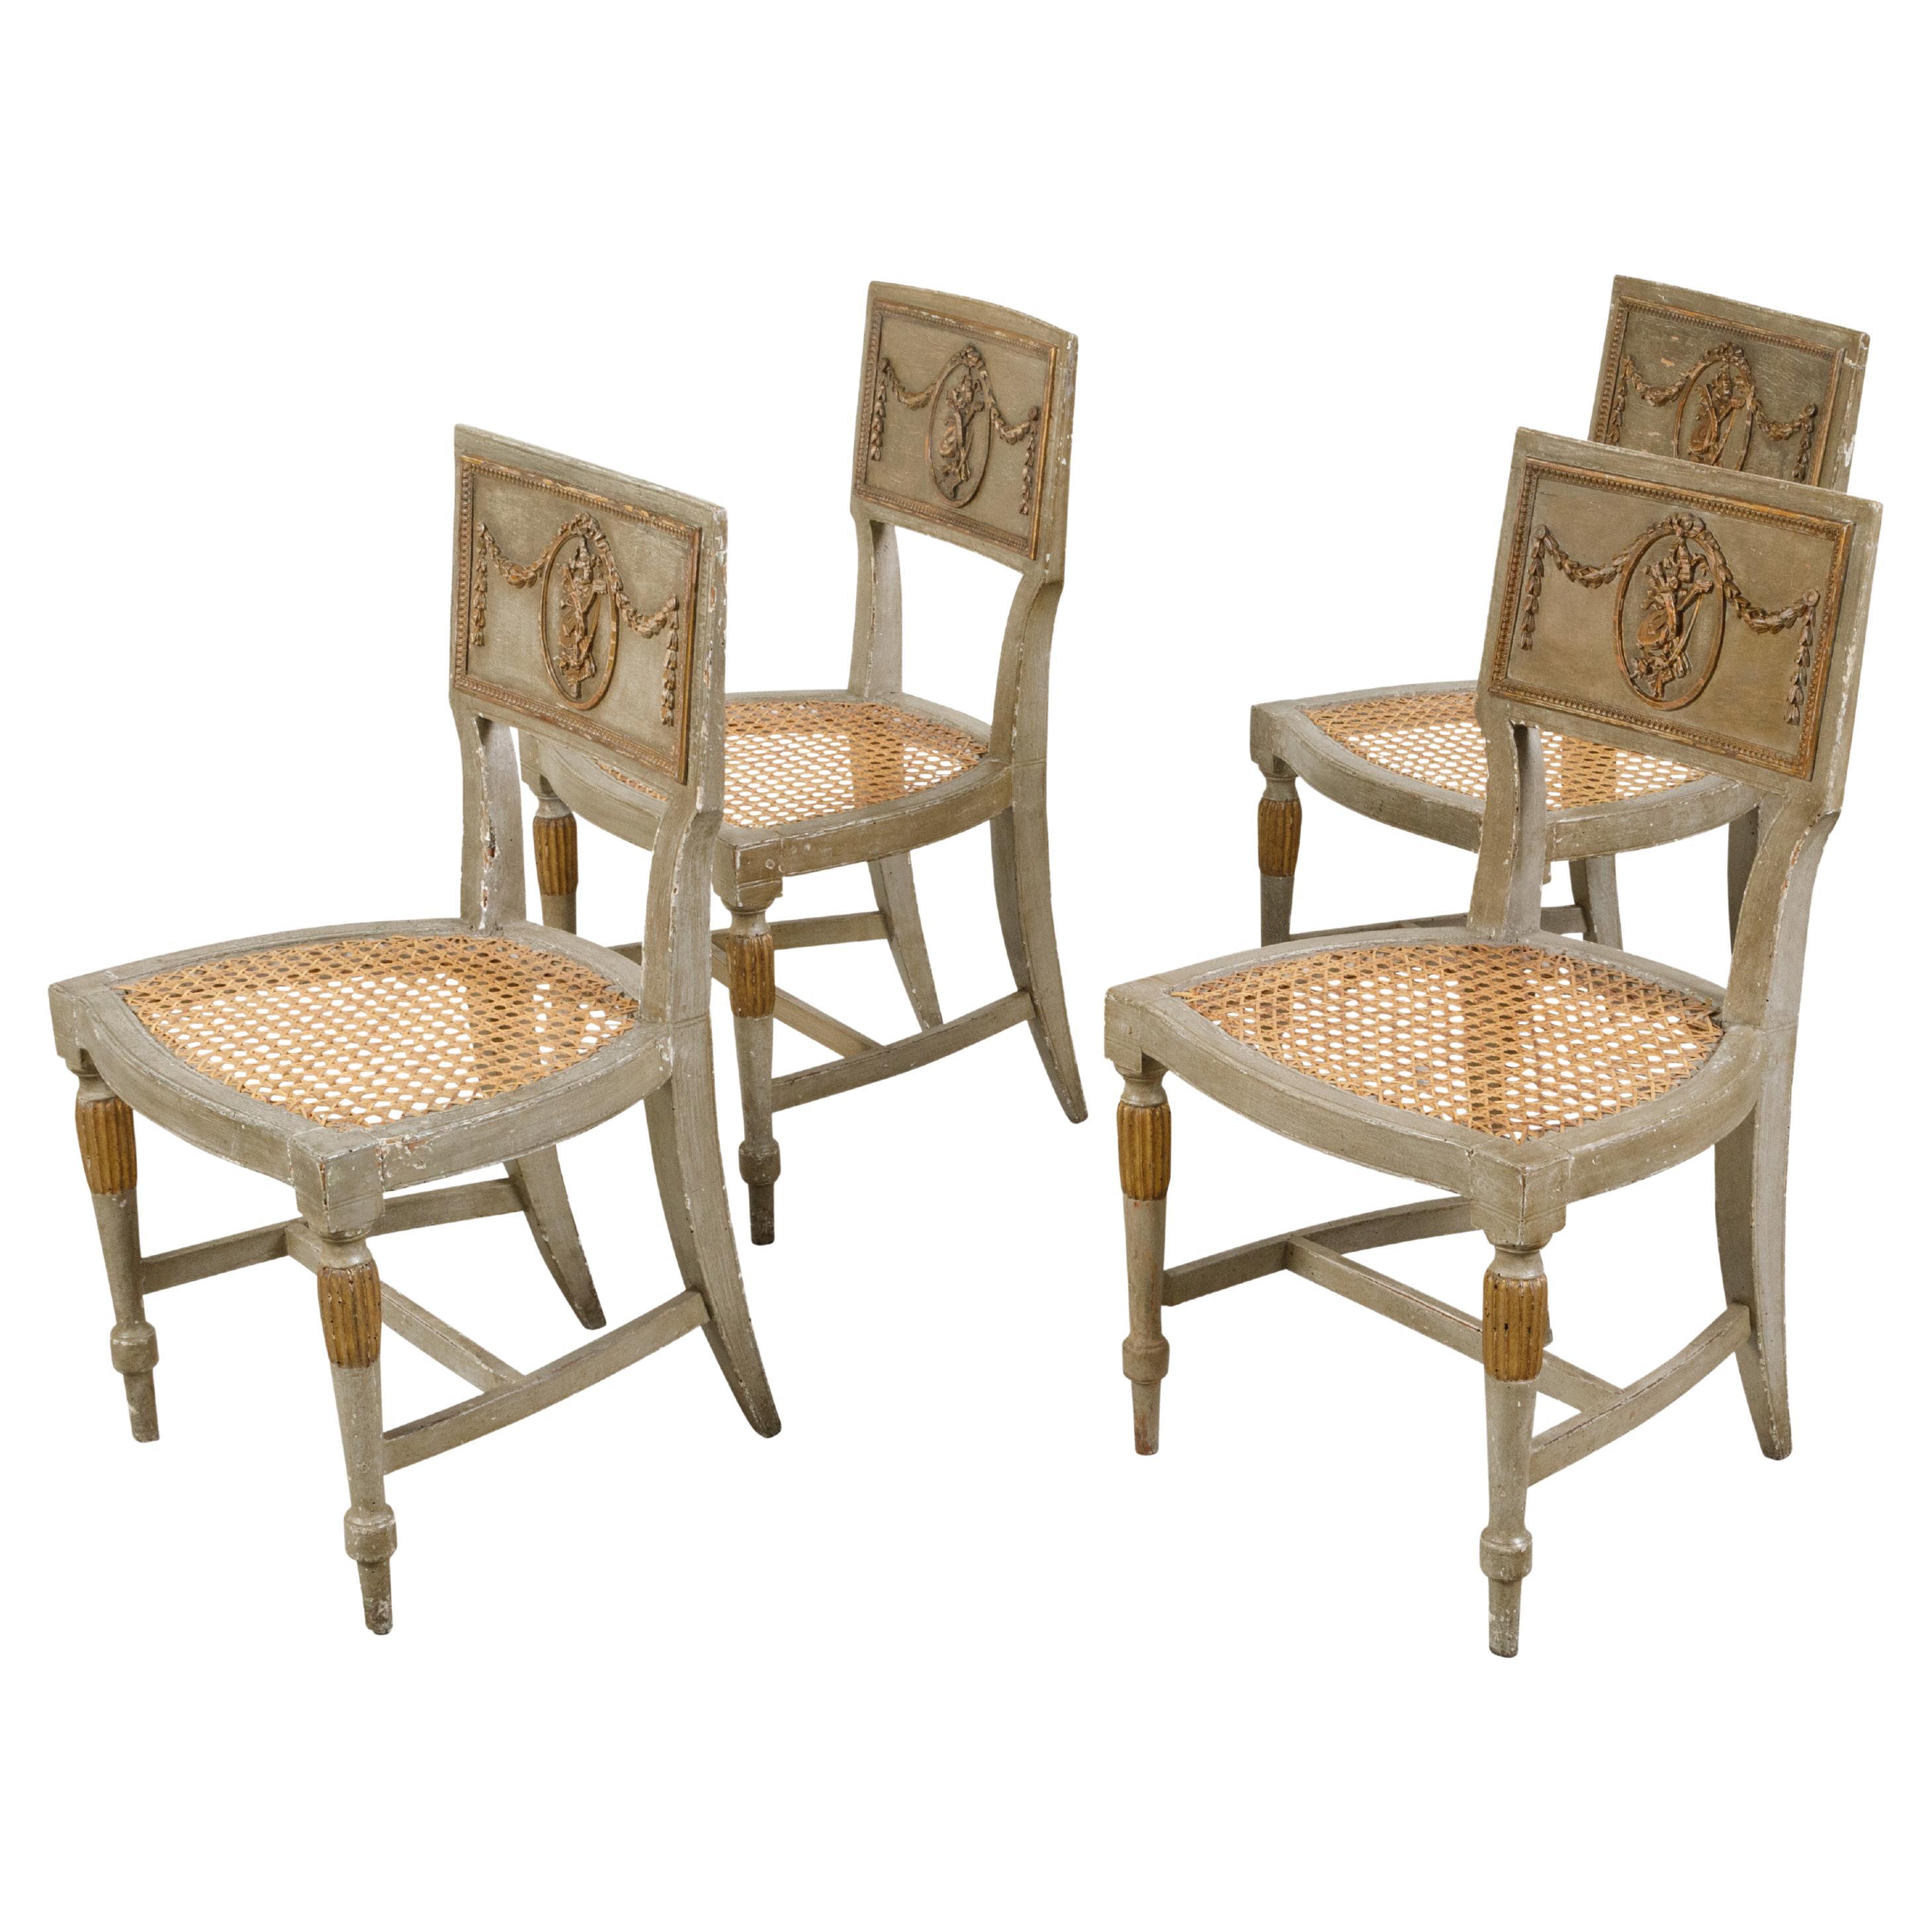 Set of Four French 18th Century Painted Side Chairs with Liberal Arts Allegory